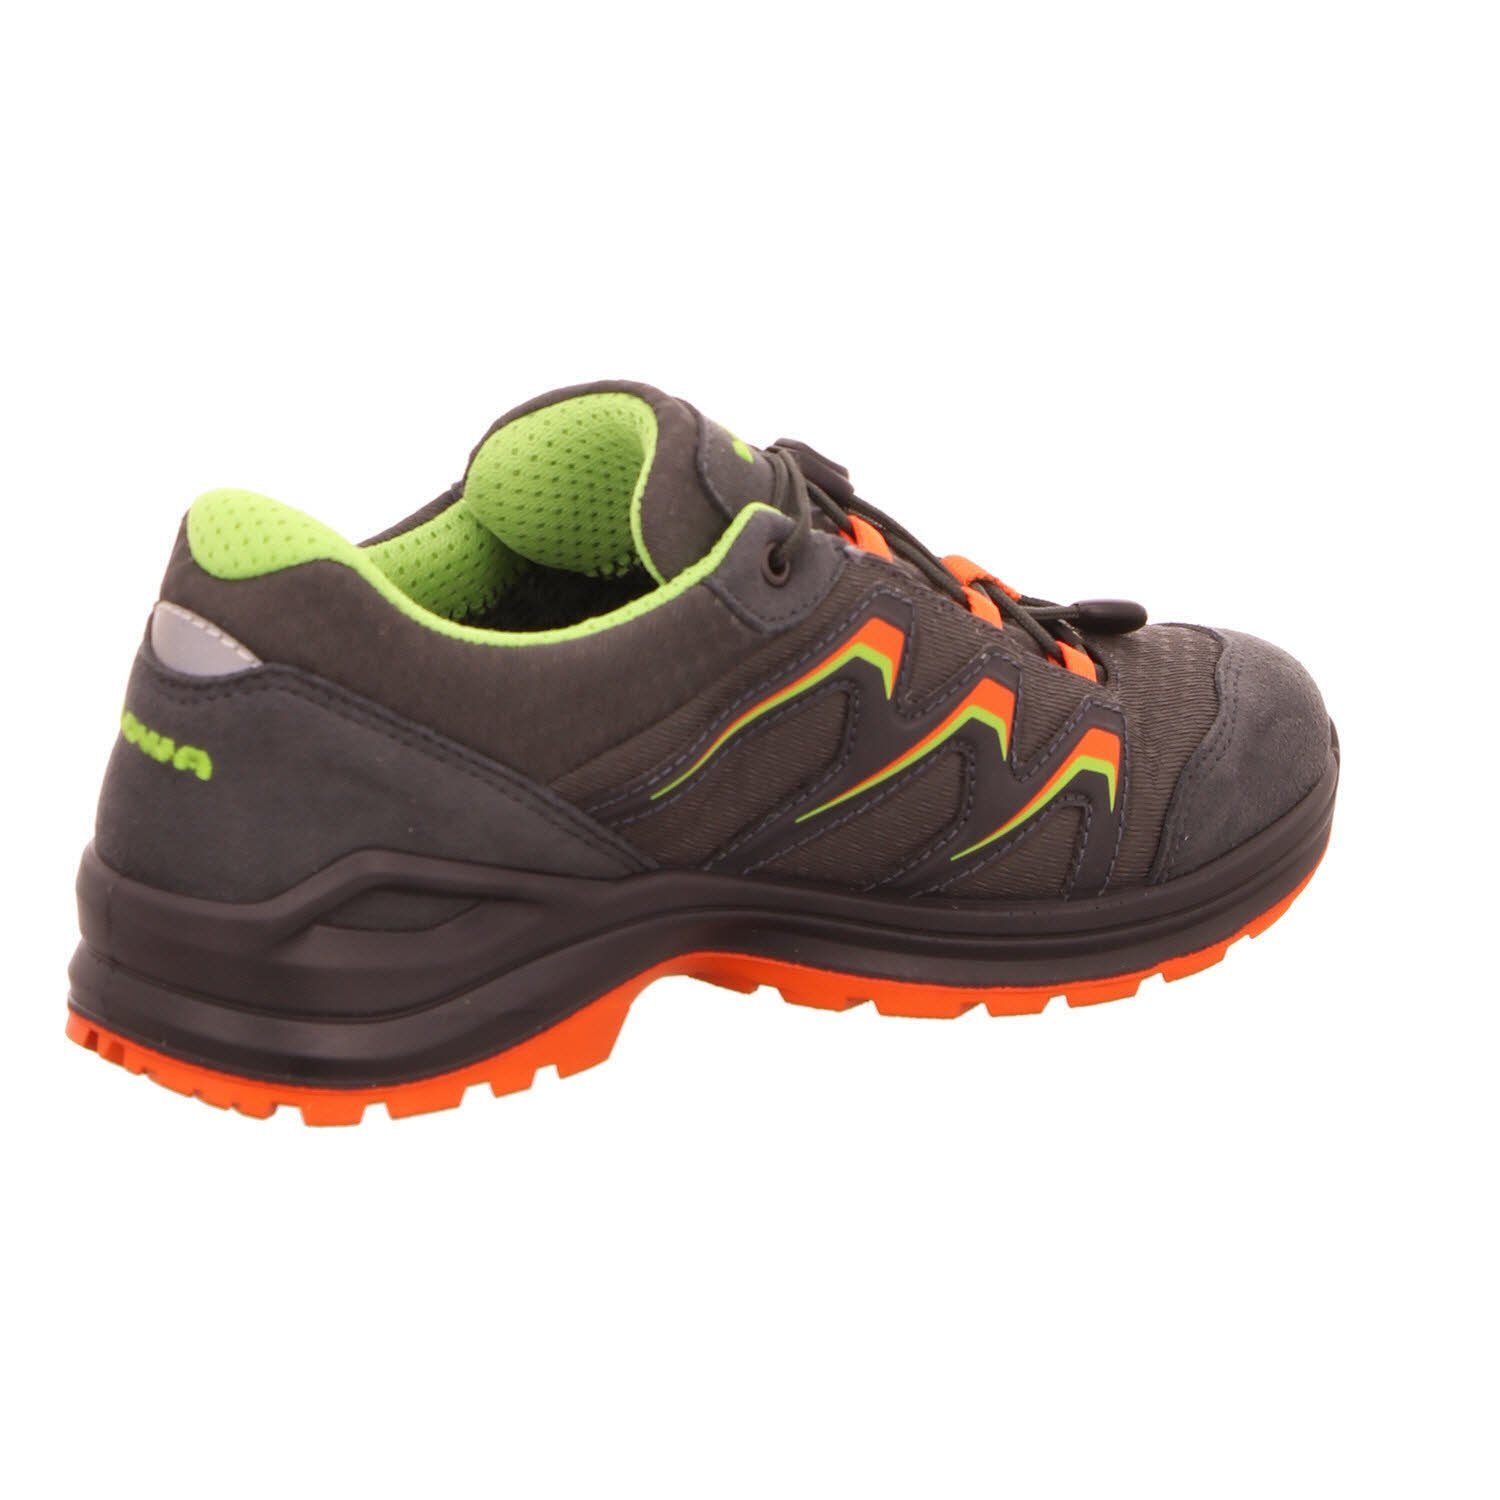 Lowa Outdoorschuh GRAPHIT/FLAME